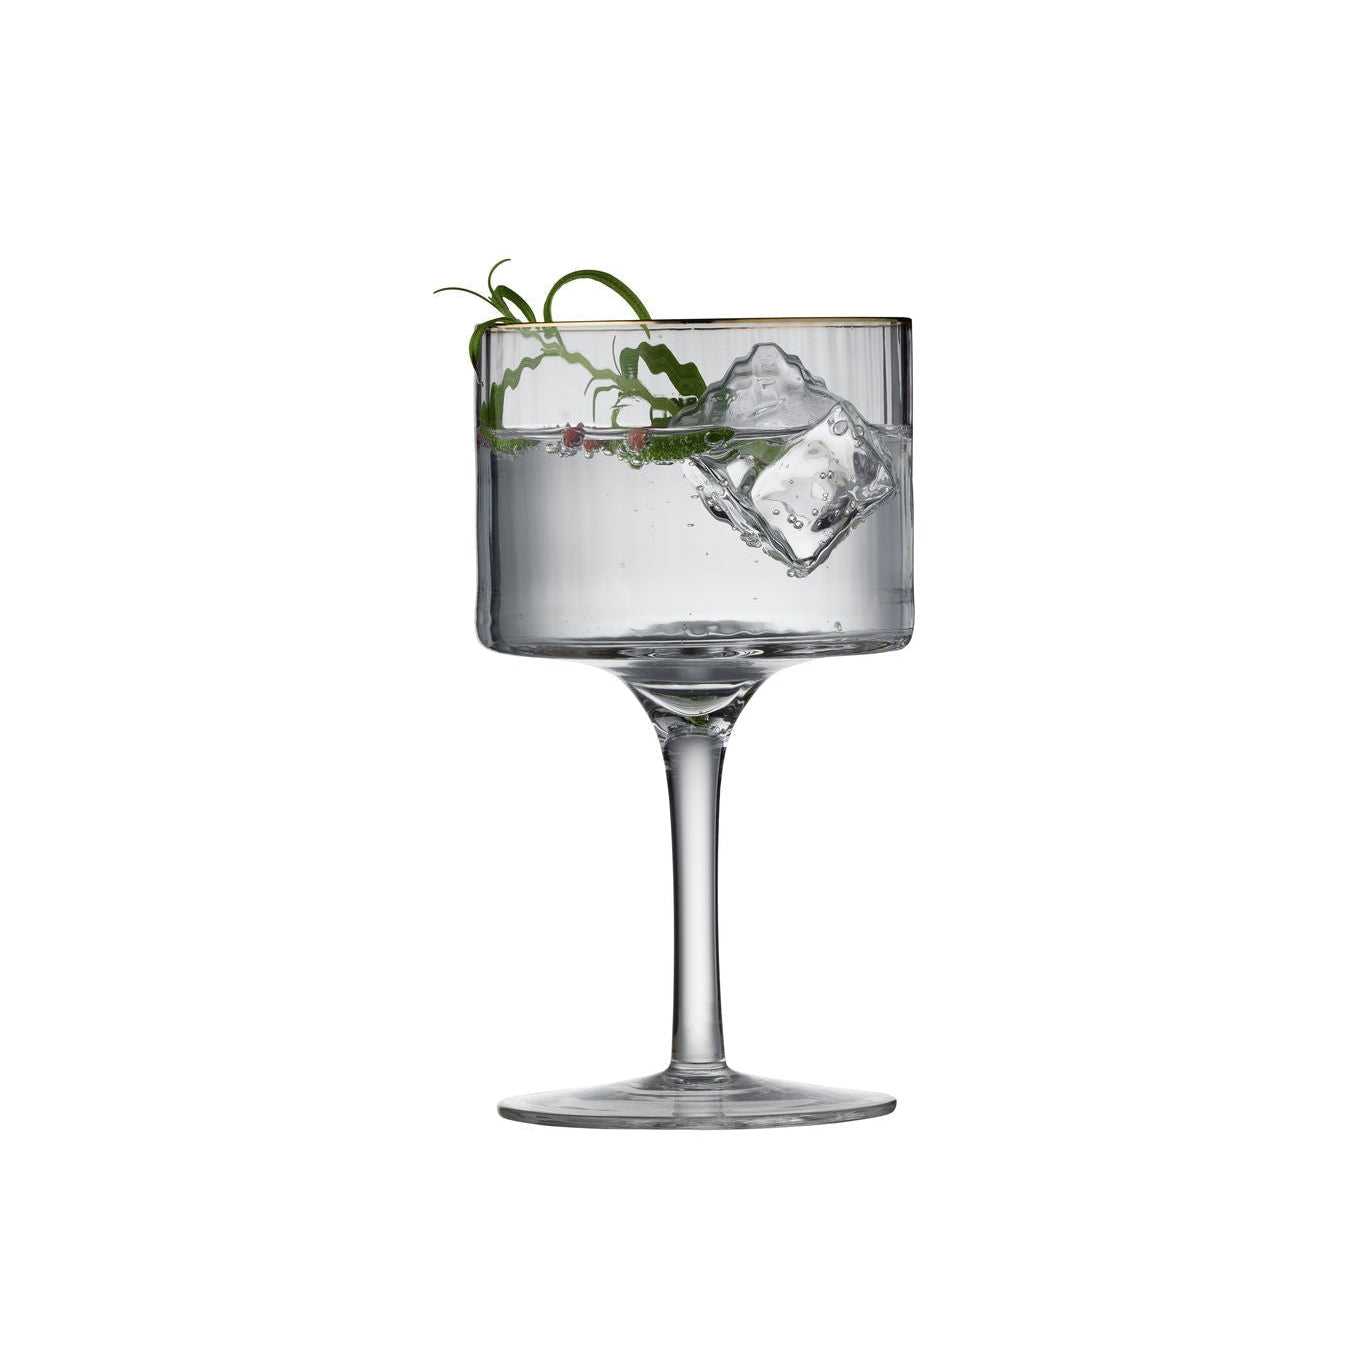 Lyngby Glas Palermo Gold Gin & Tonic Glass 32 Cl, 4 ks.